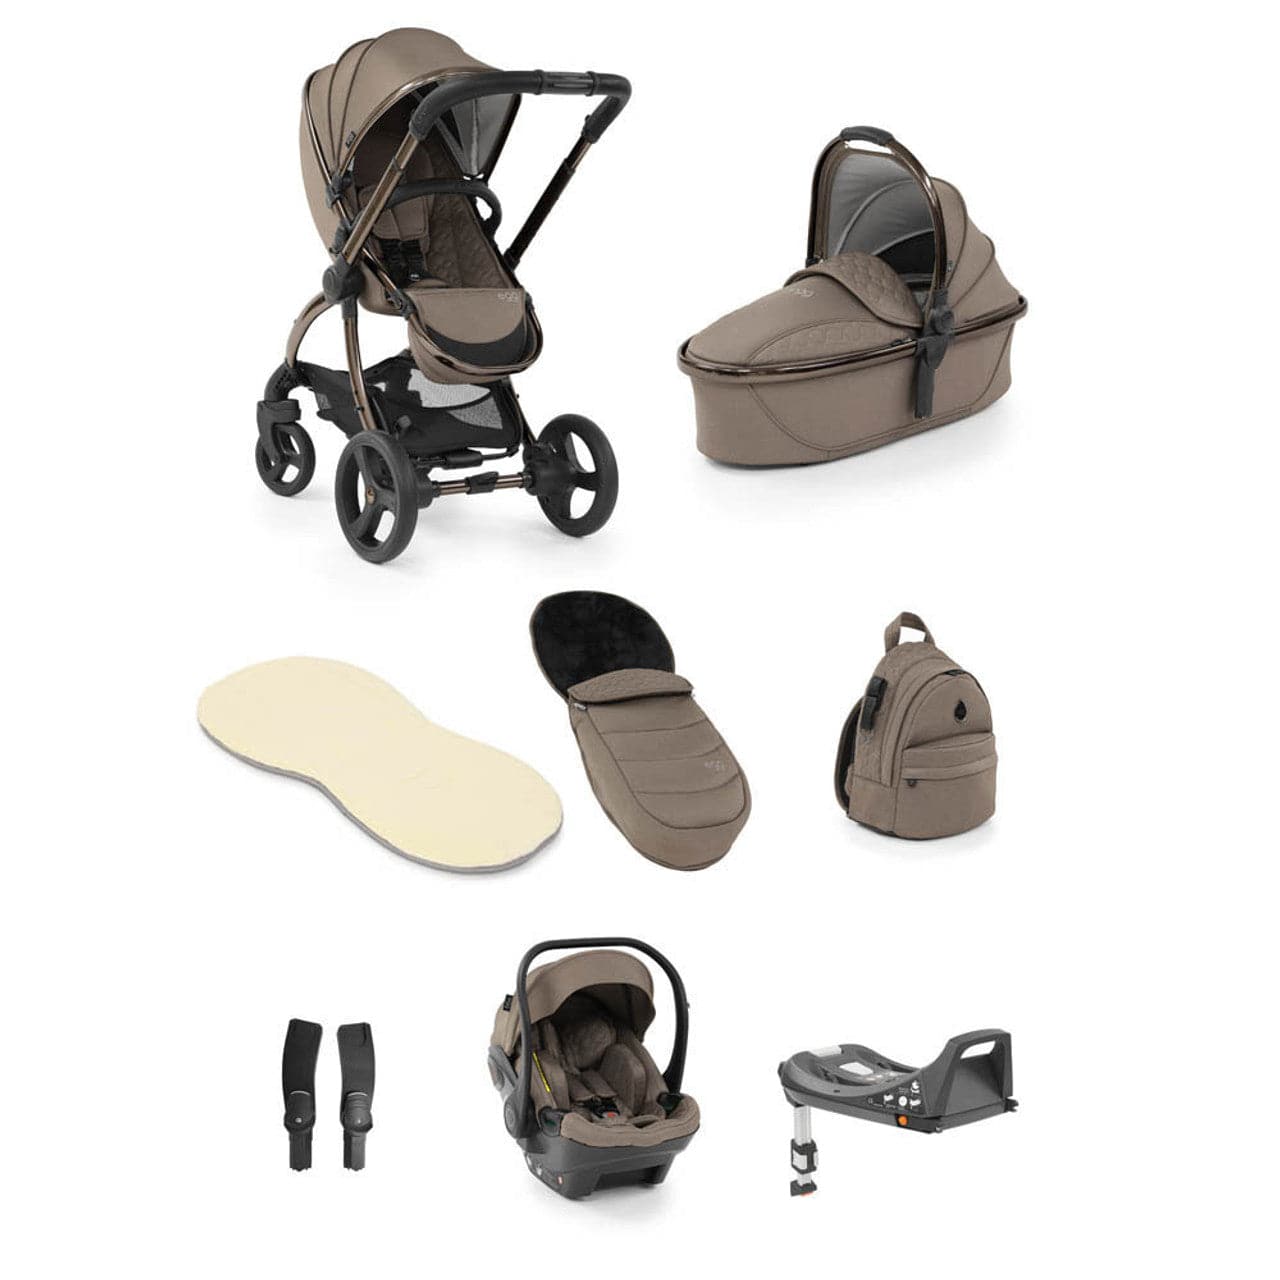 Egg® 2 Luxury Shell i-Size Travel System Bundle - Mink -  | For Your Little One